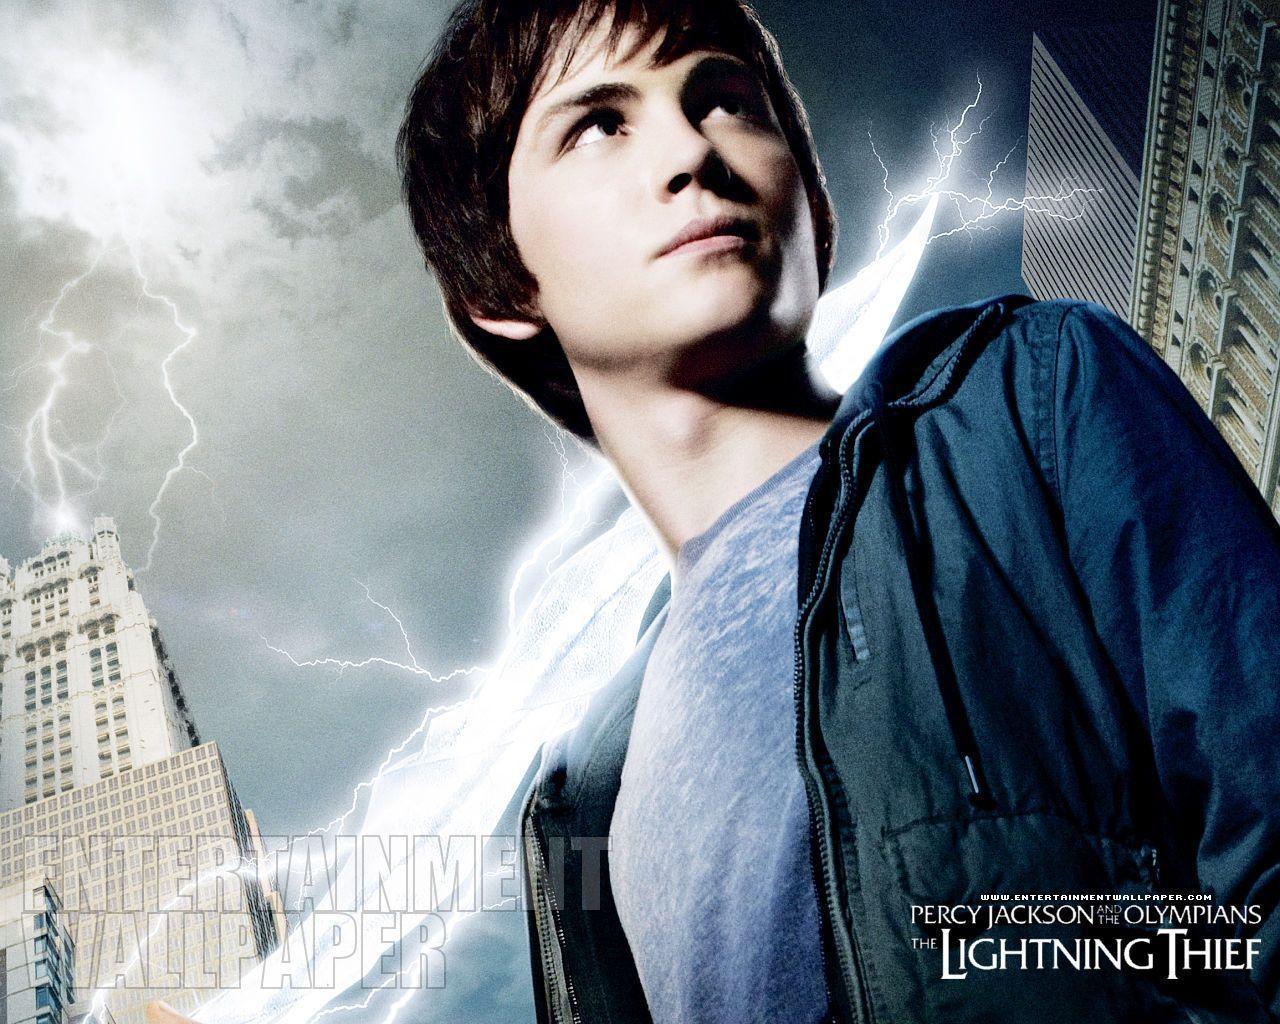 Percy Jackson and the Olympians Wallpaper